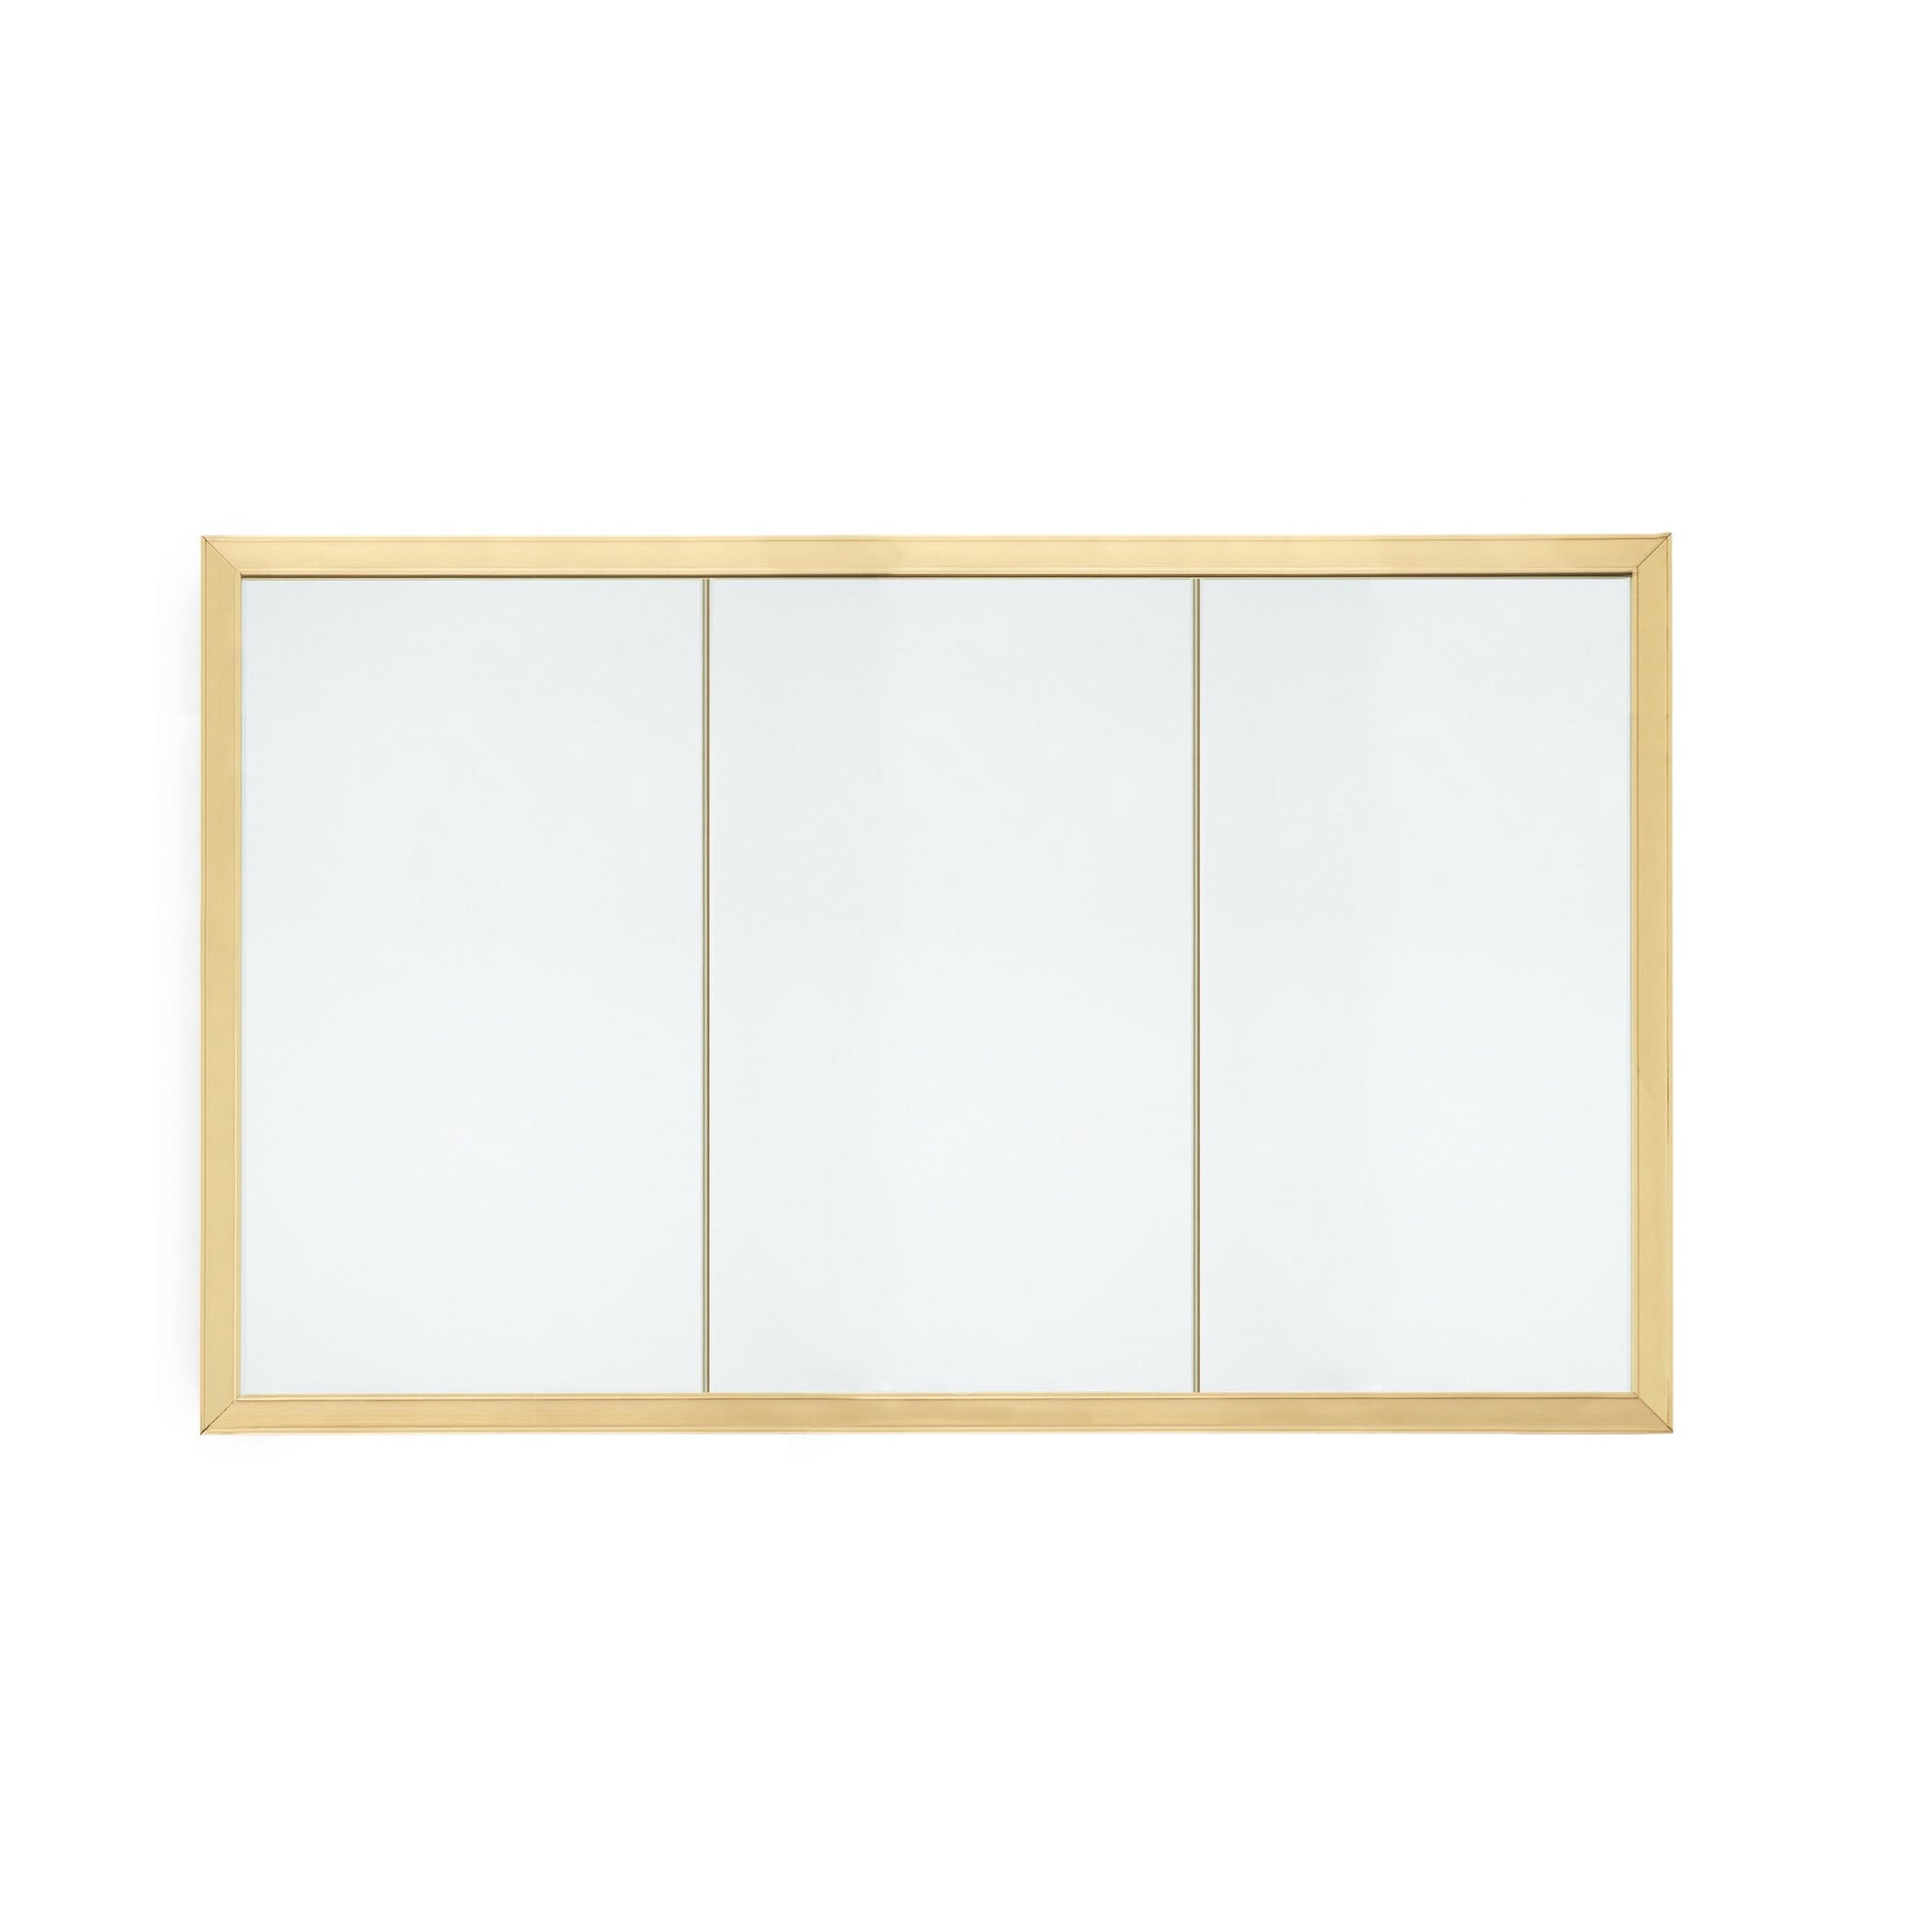 4260C-TW-GP Sherle Wagner International Contemporary Medicine Cabinet in Gold Plate metal finish